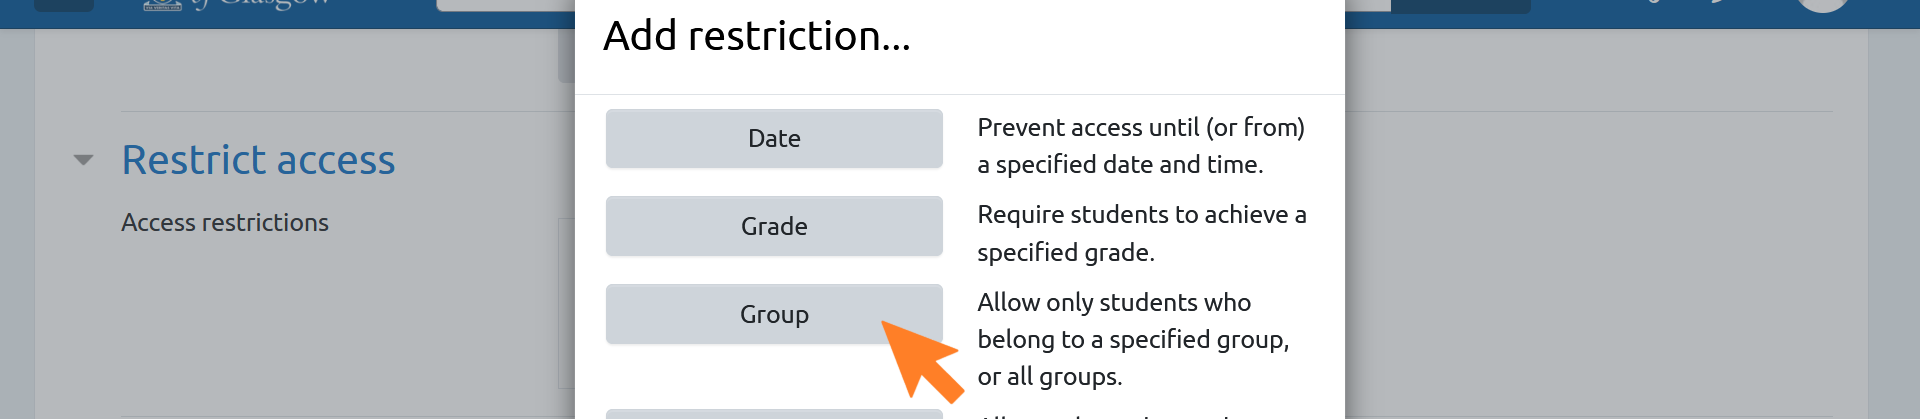 A screenshot of the 'Add restriction' settings in the Moodle assignment settings page. There is an orange arrow pointing towards the 'Group' button.